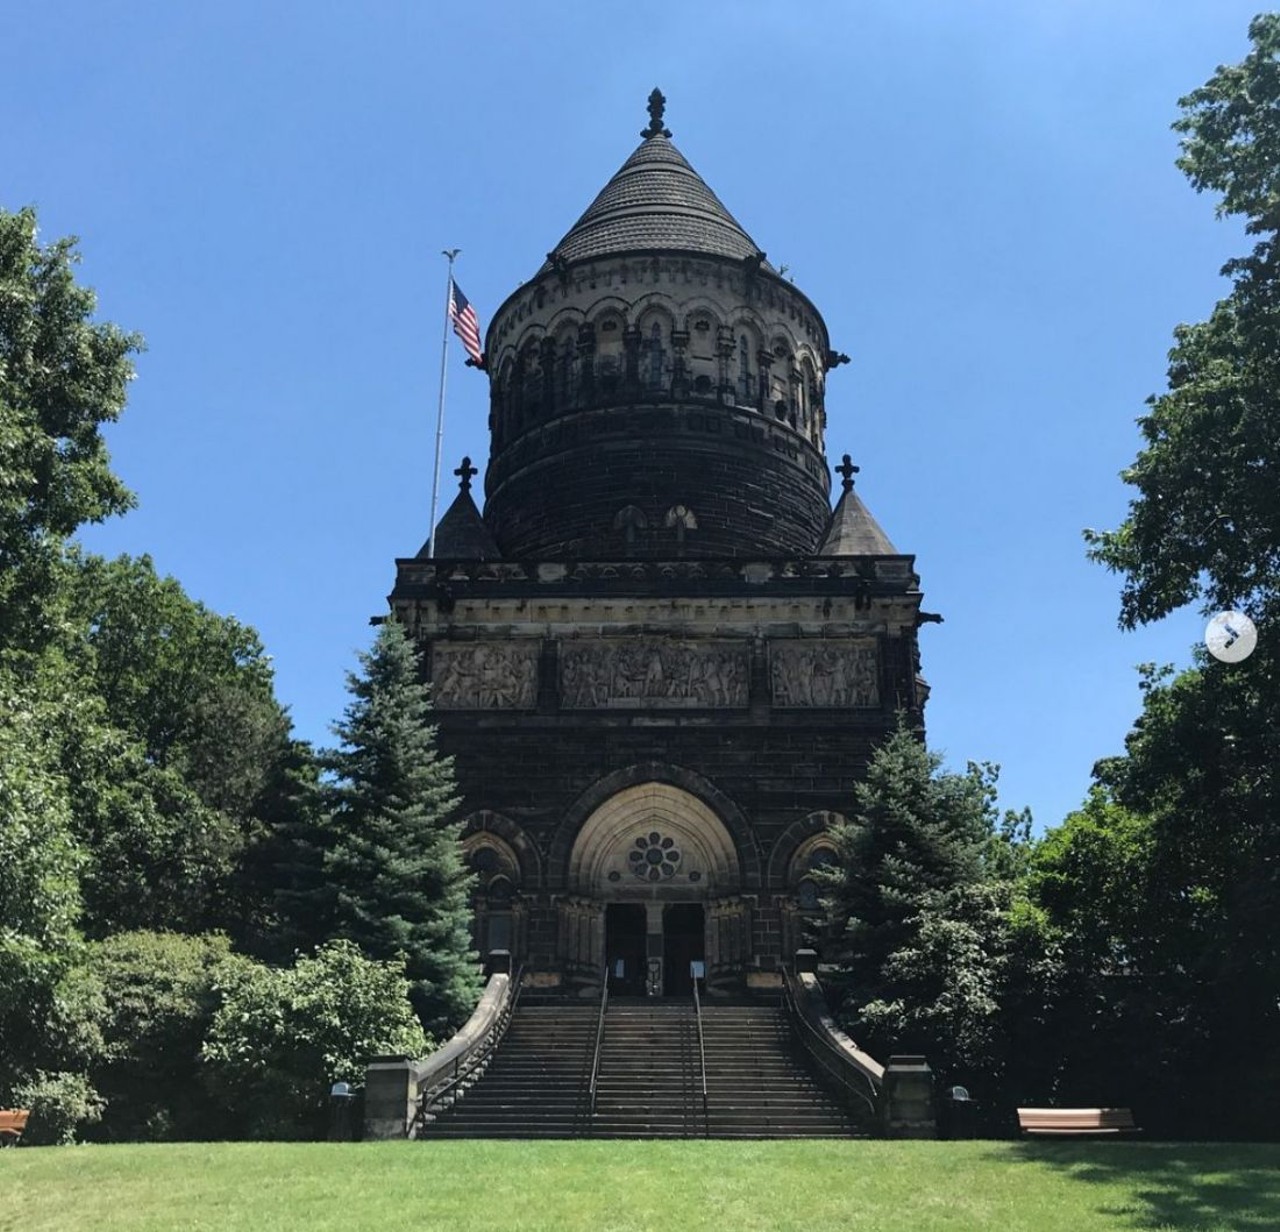 James A. Garfield Monument
12316 Euclid Ave., 216-421-2665
Though this monument is in the Lake View Cemetery, it is a wonderful spot to spend an afternoon. Have a picnic outside the monument on the open lawn, and then explore the attraction and its rich history. 
Photo via bryanindc/Instagram